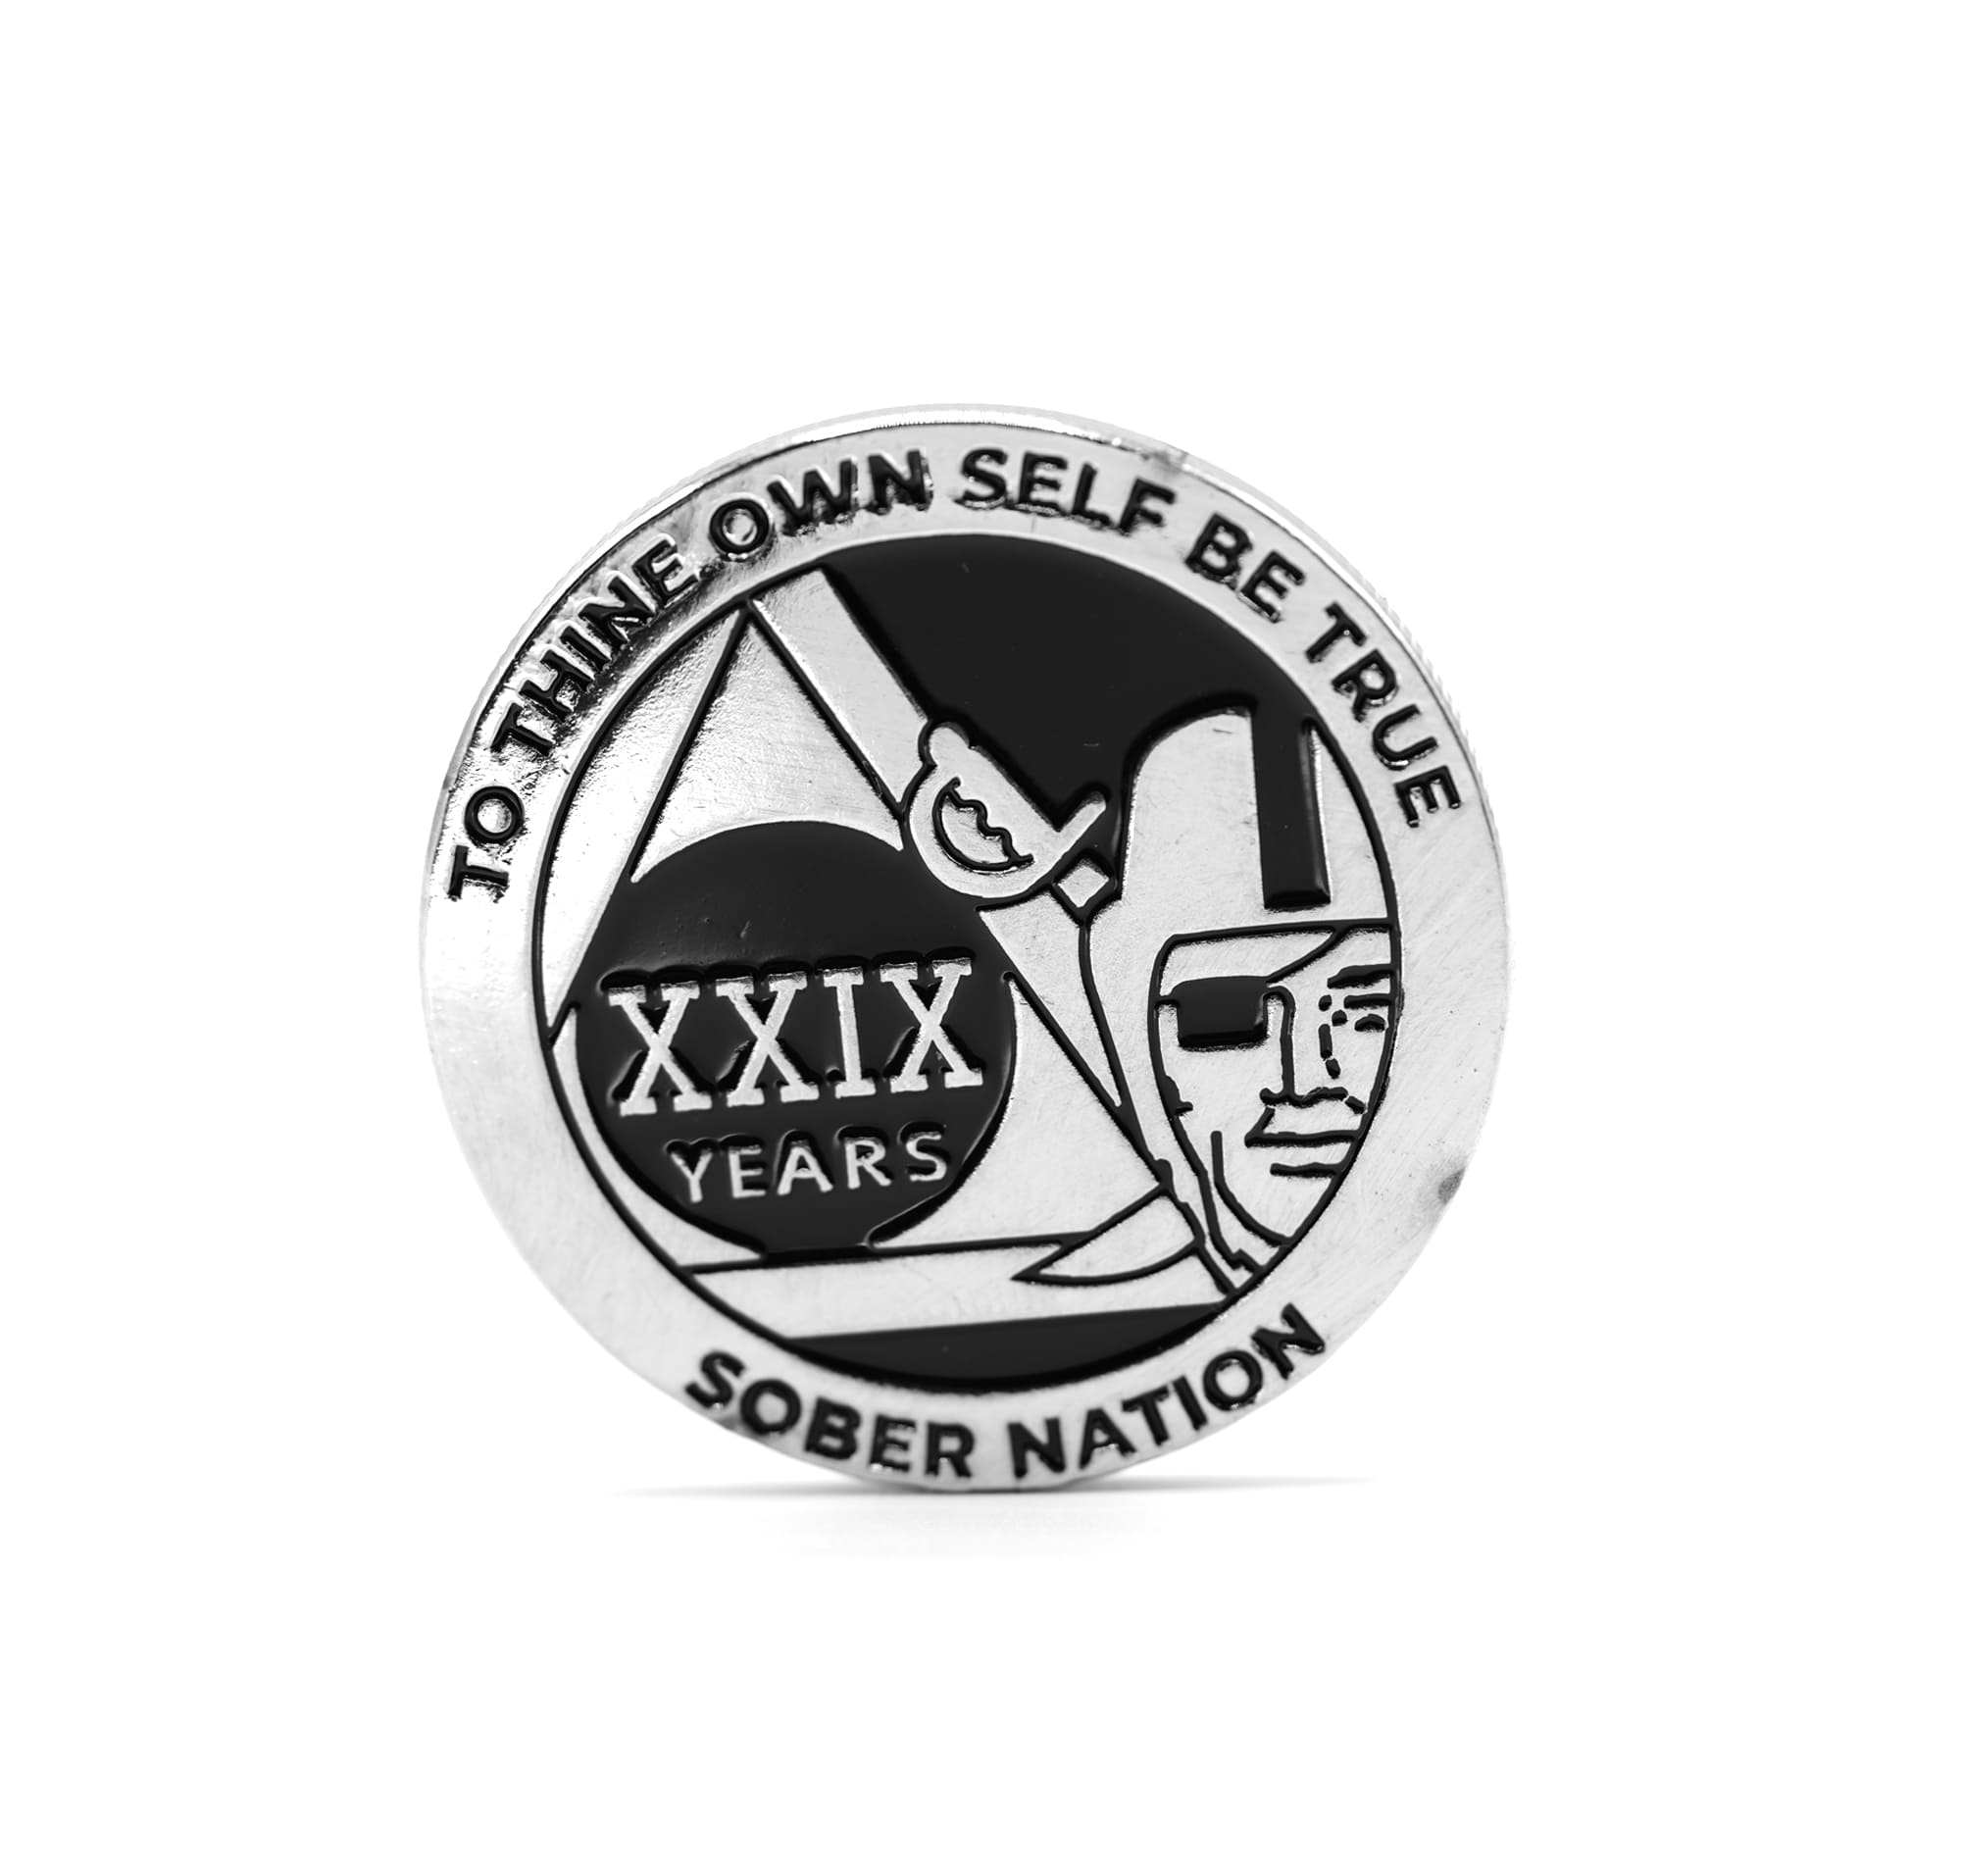 Silver and Black Raider Pirate Alcoholics Anonymous AA Chip